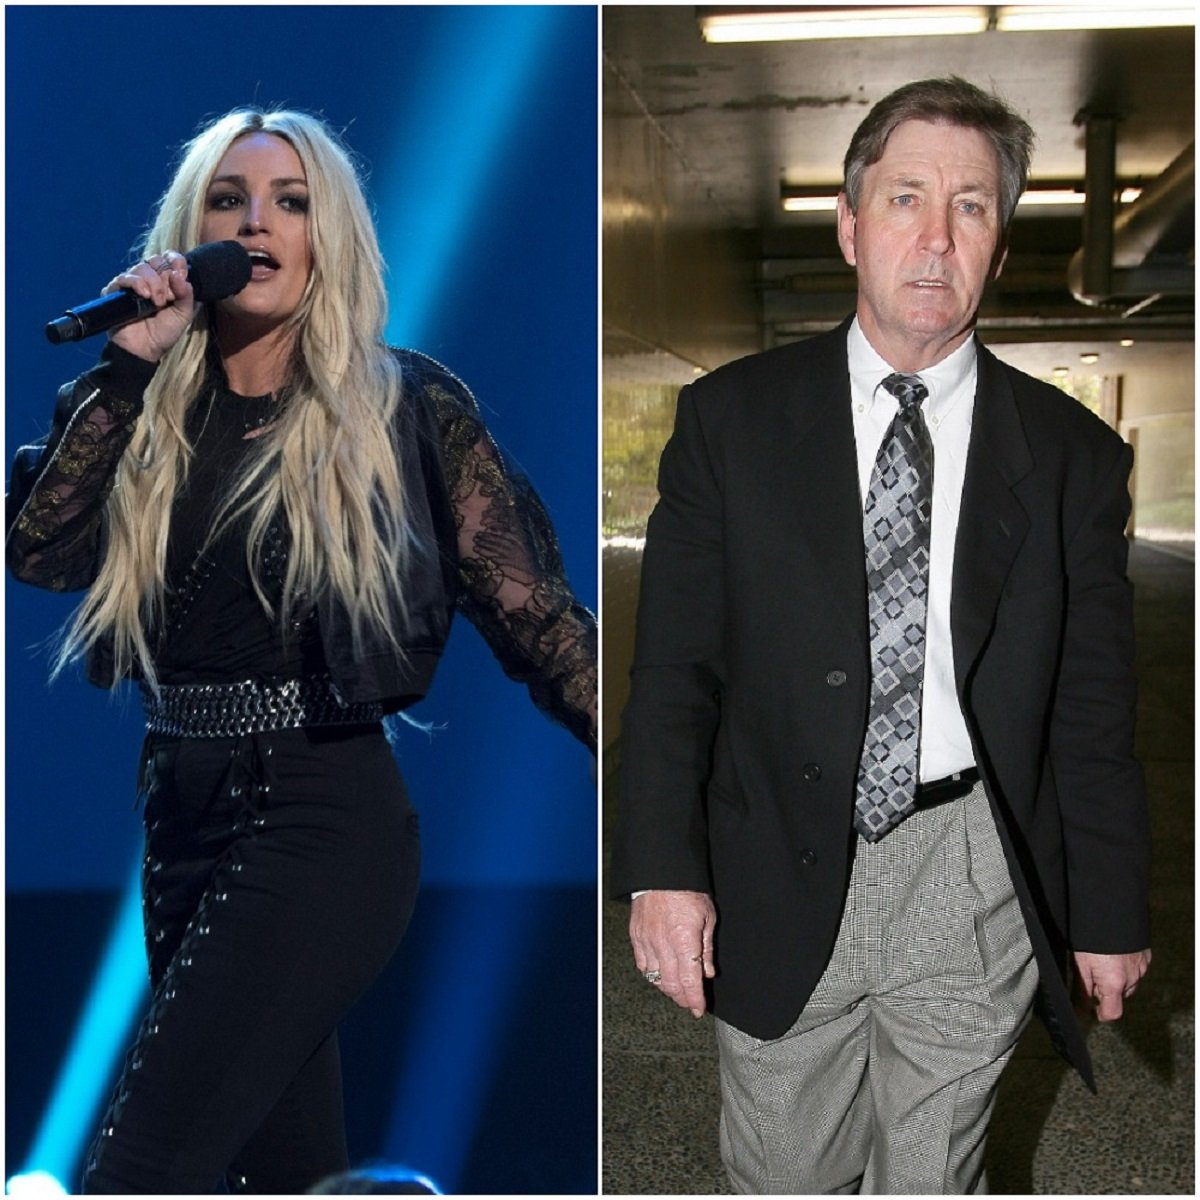 (L): Jamie Lynn Spears singing onstage, (R): Jamie Spears leaving a courthouse